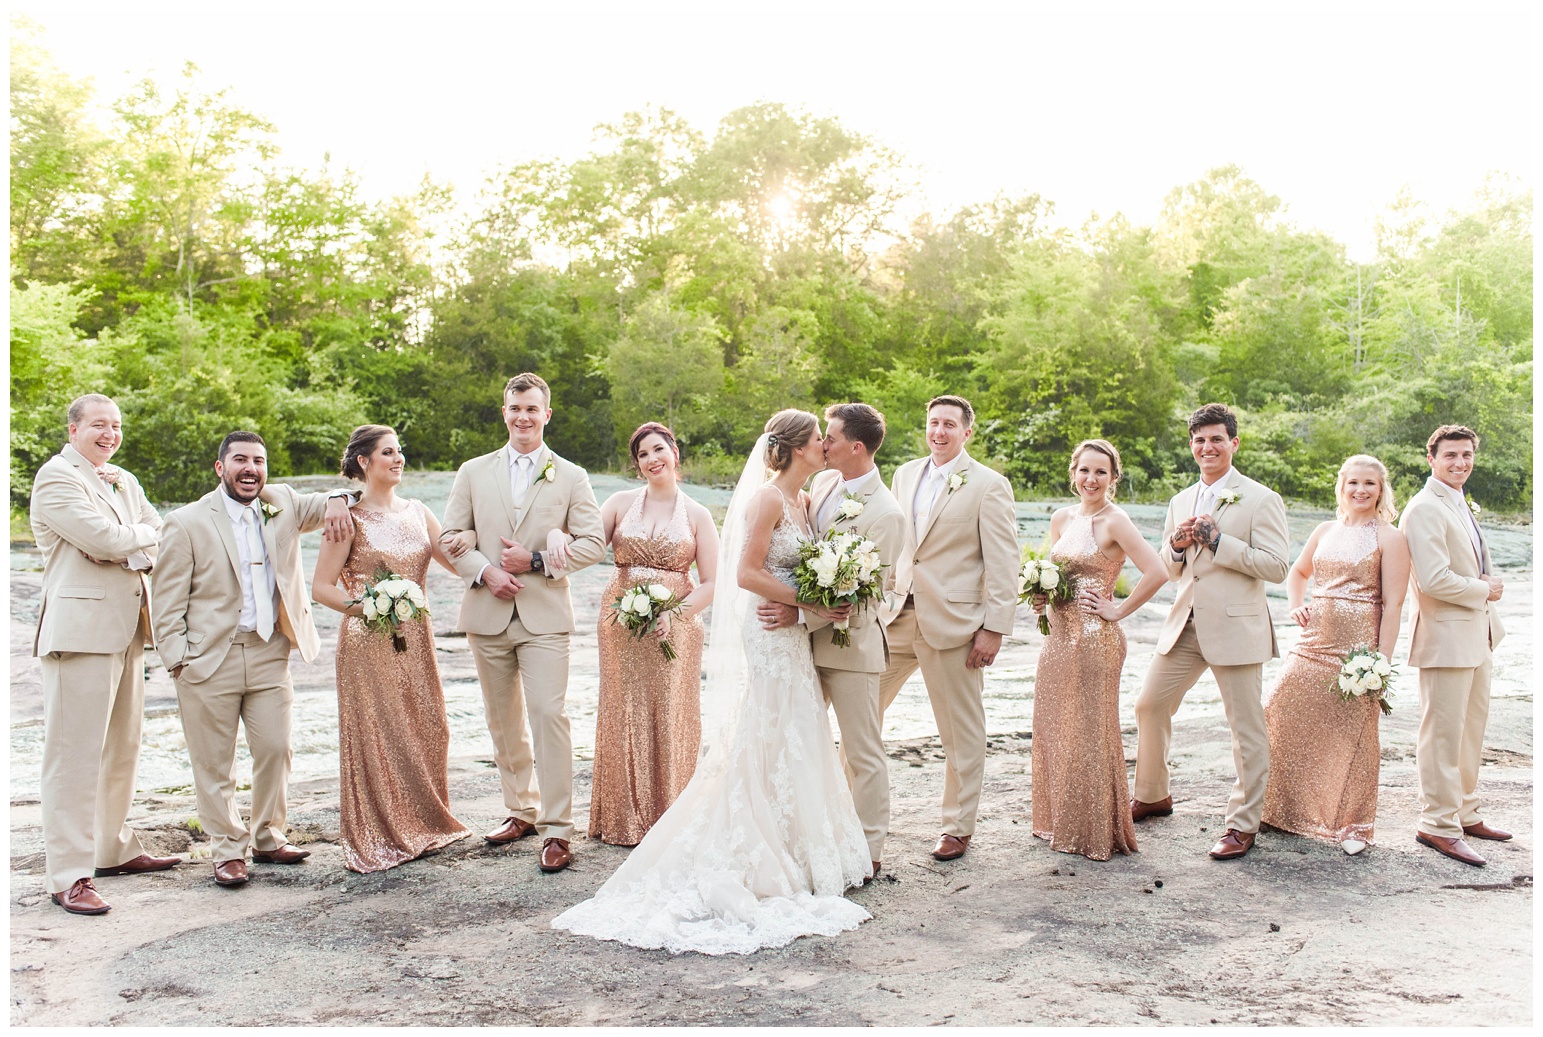 Rose Gold & Greenery Wedding at The Mill At Fine Creek Wedding | S&D Photography